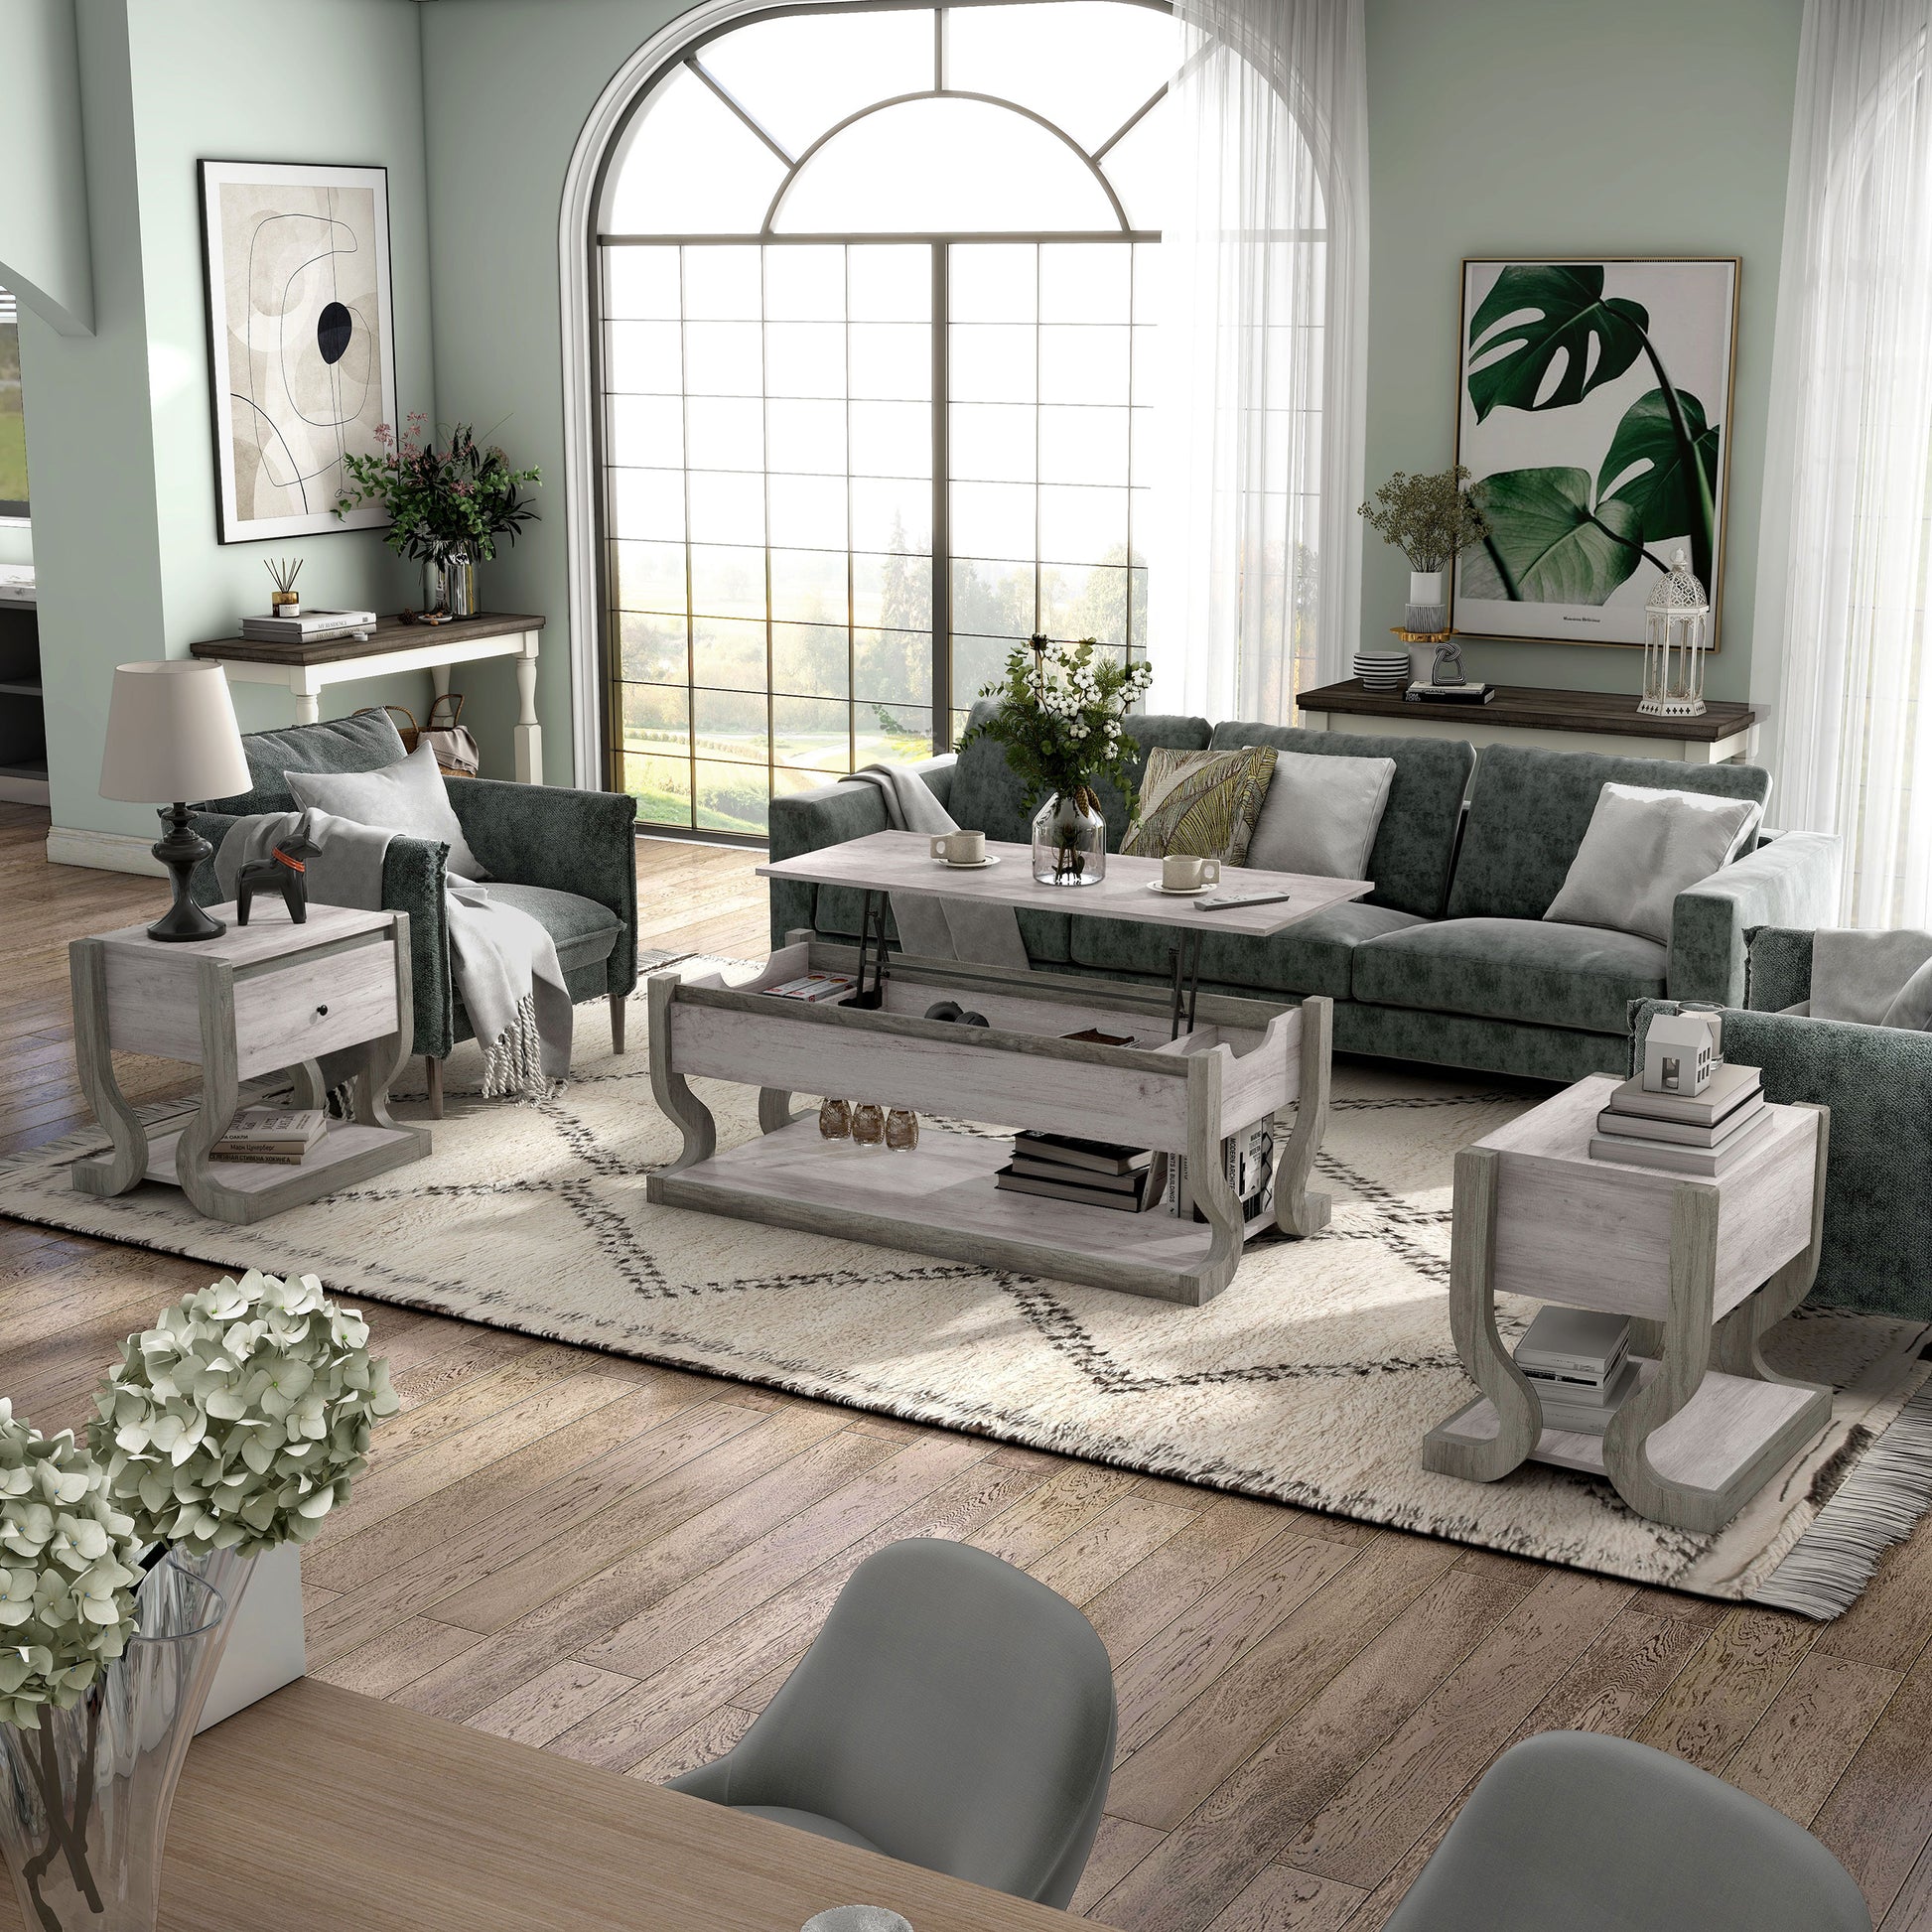 Left angled transitional three-piece coastal white coffee table set with storage shown with lift-top coffee table raised in a living room with accessories